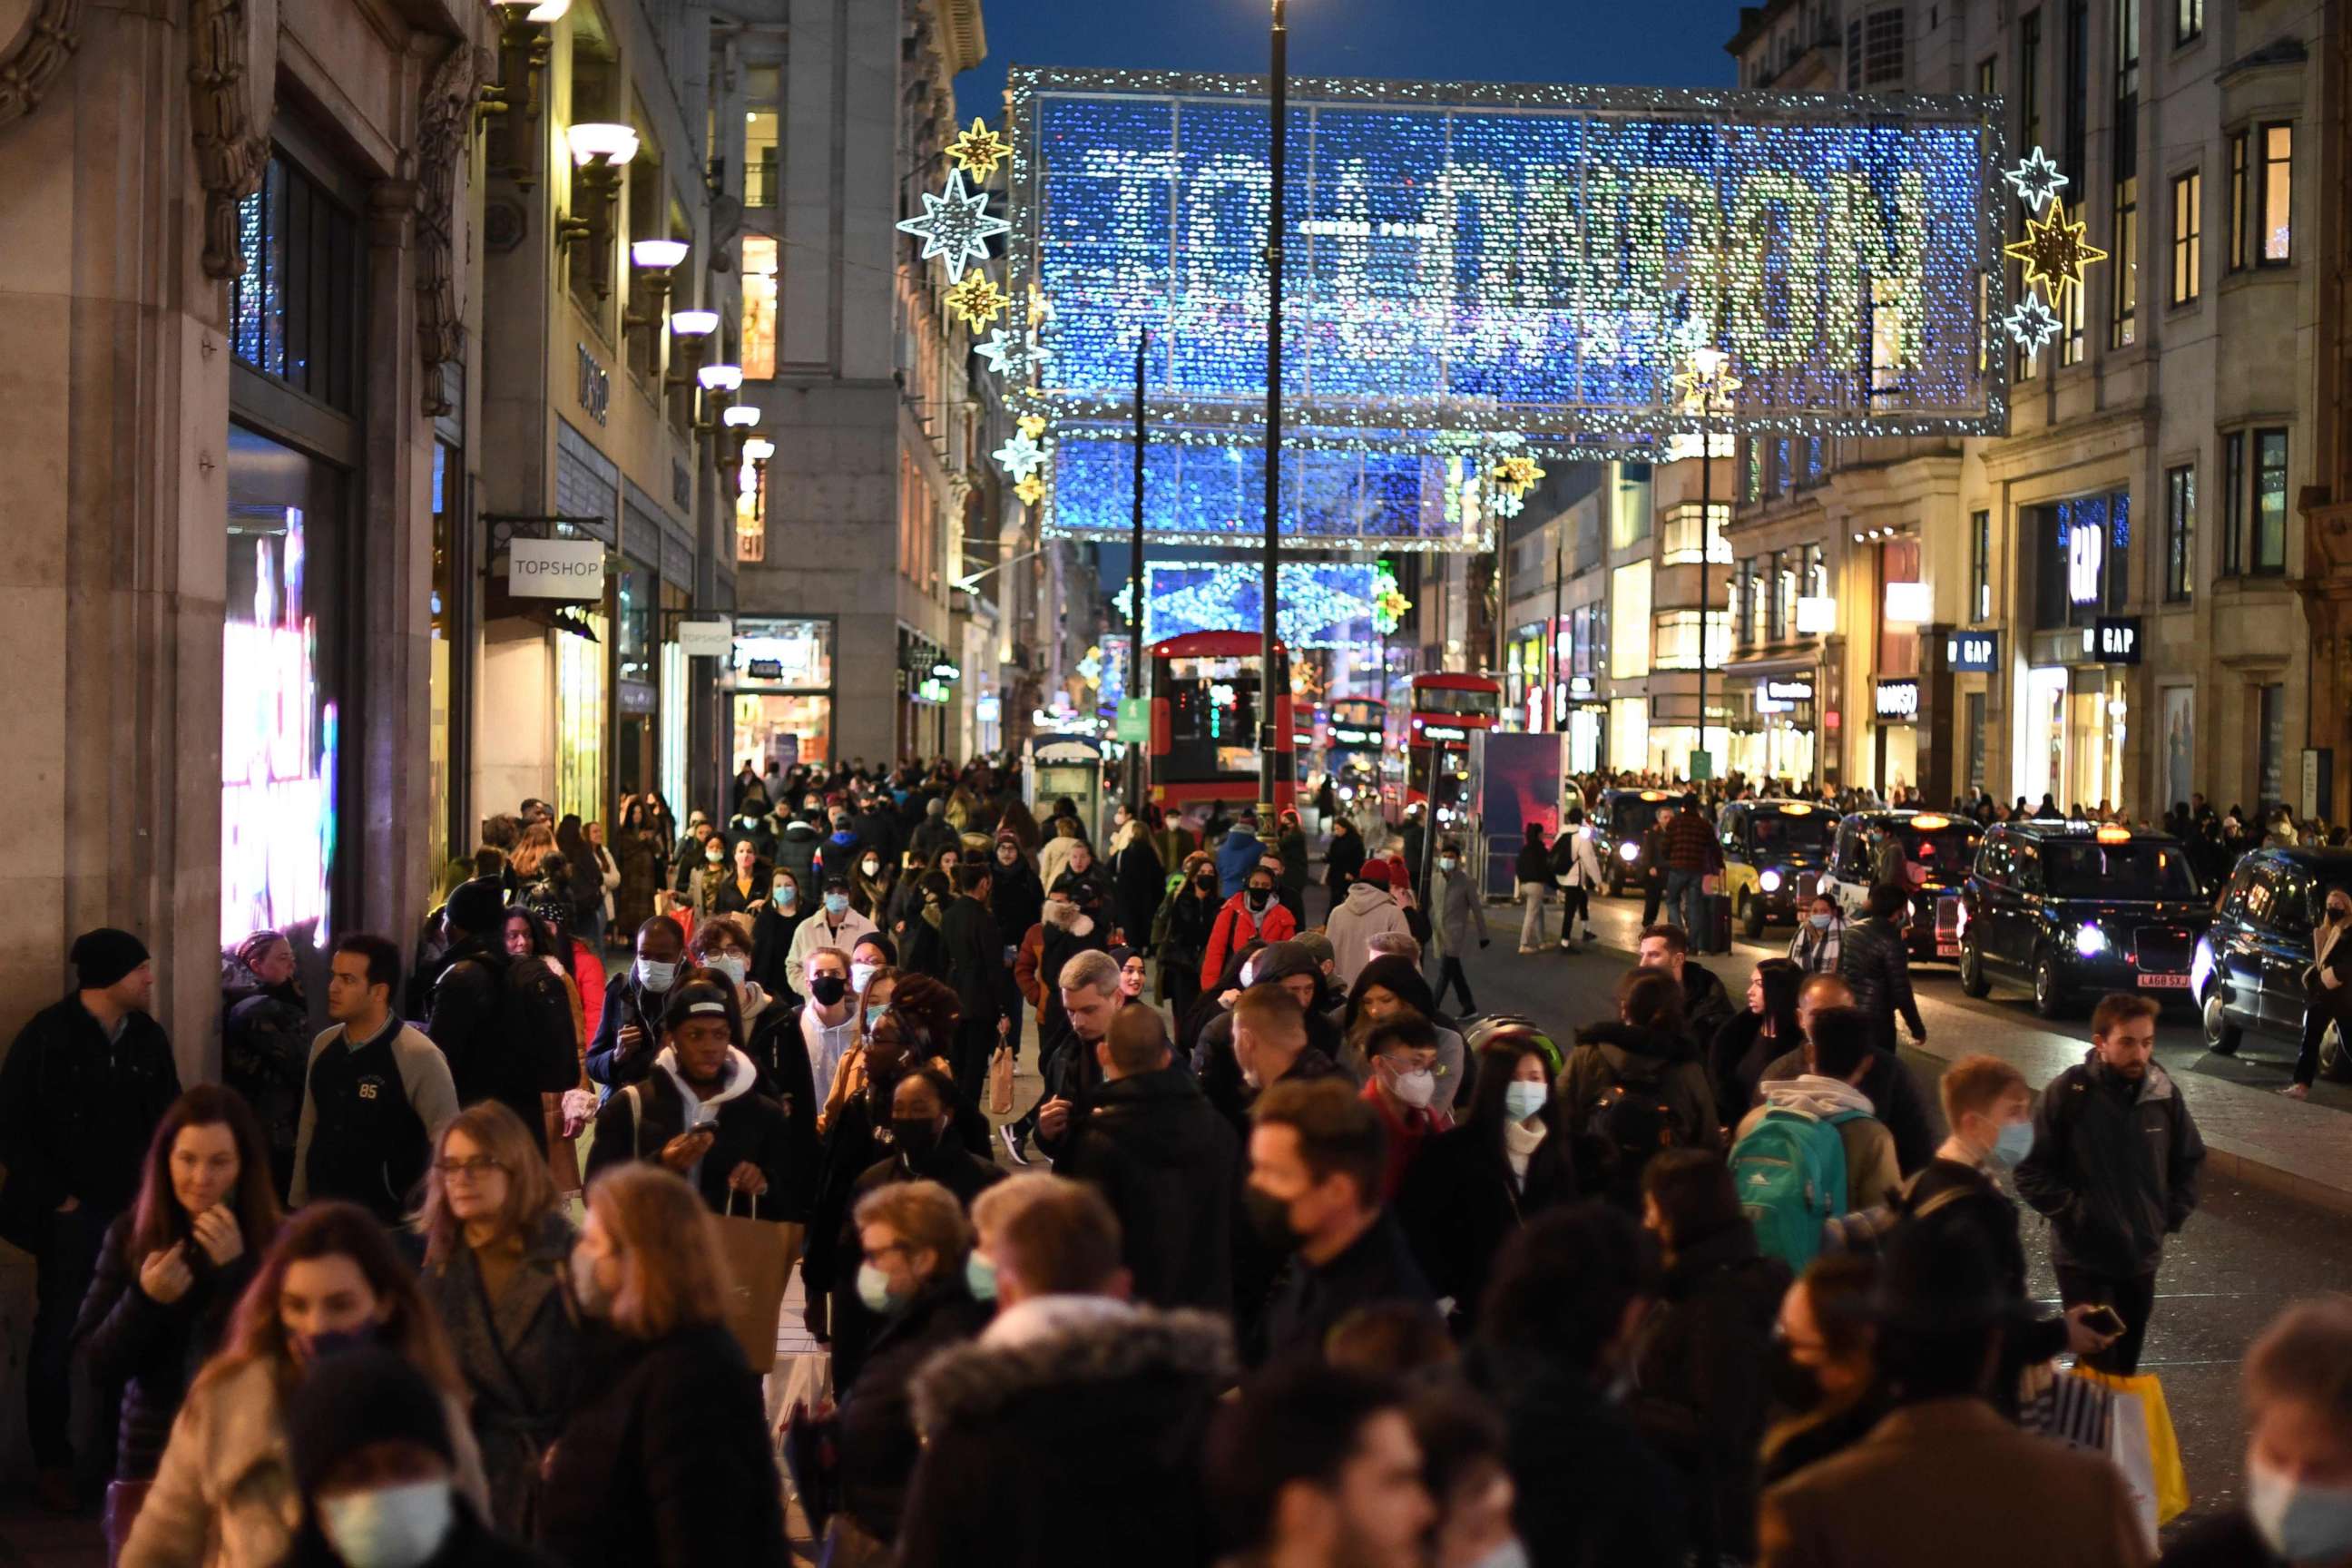 PHOTO: Christmas illuminations are seen above shoppers on Regent Street in the main high-street shopping area of London, Dec. 15, 2020 ahead of fresh measures for the capital amid rising novel coronavirus infection rates.